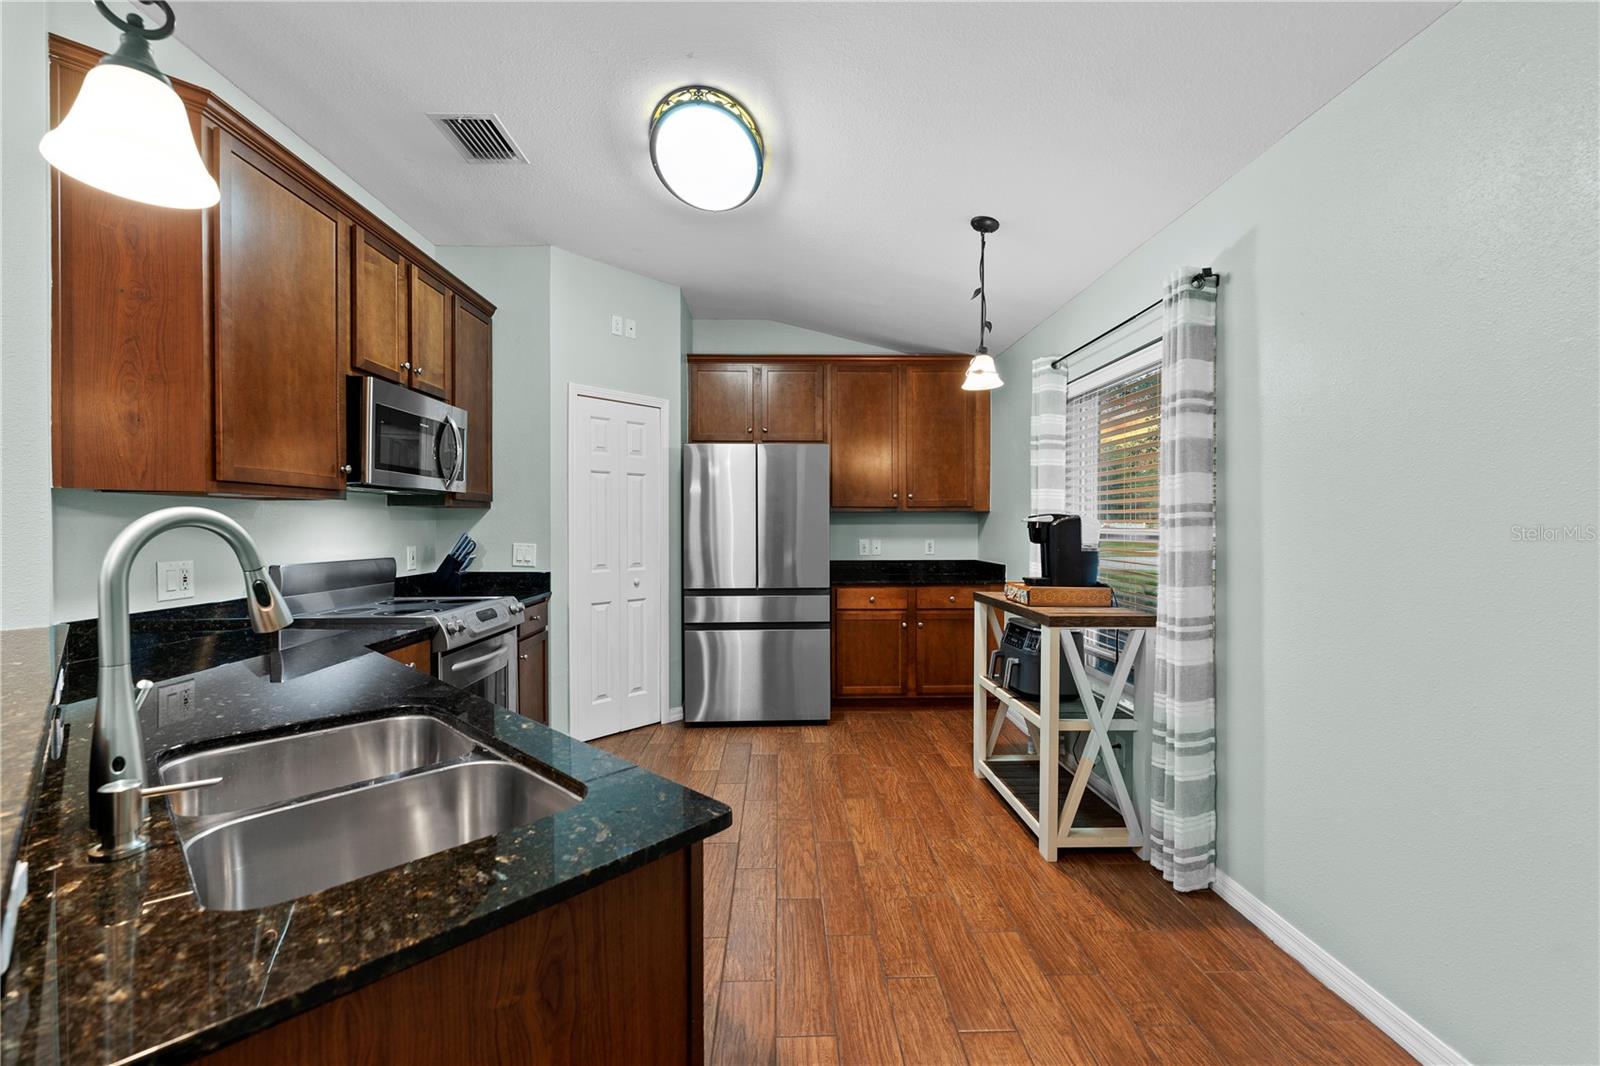 Beautiful Kitchen With Granite, Stainless Steel Appliances, Walk In Pantry & Great Space